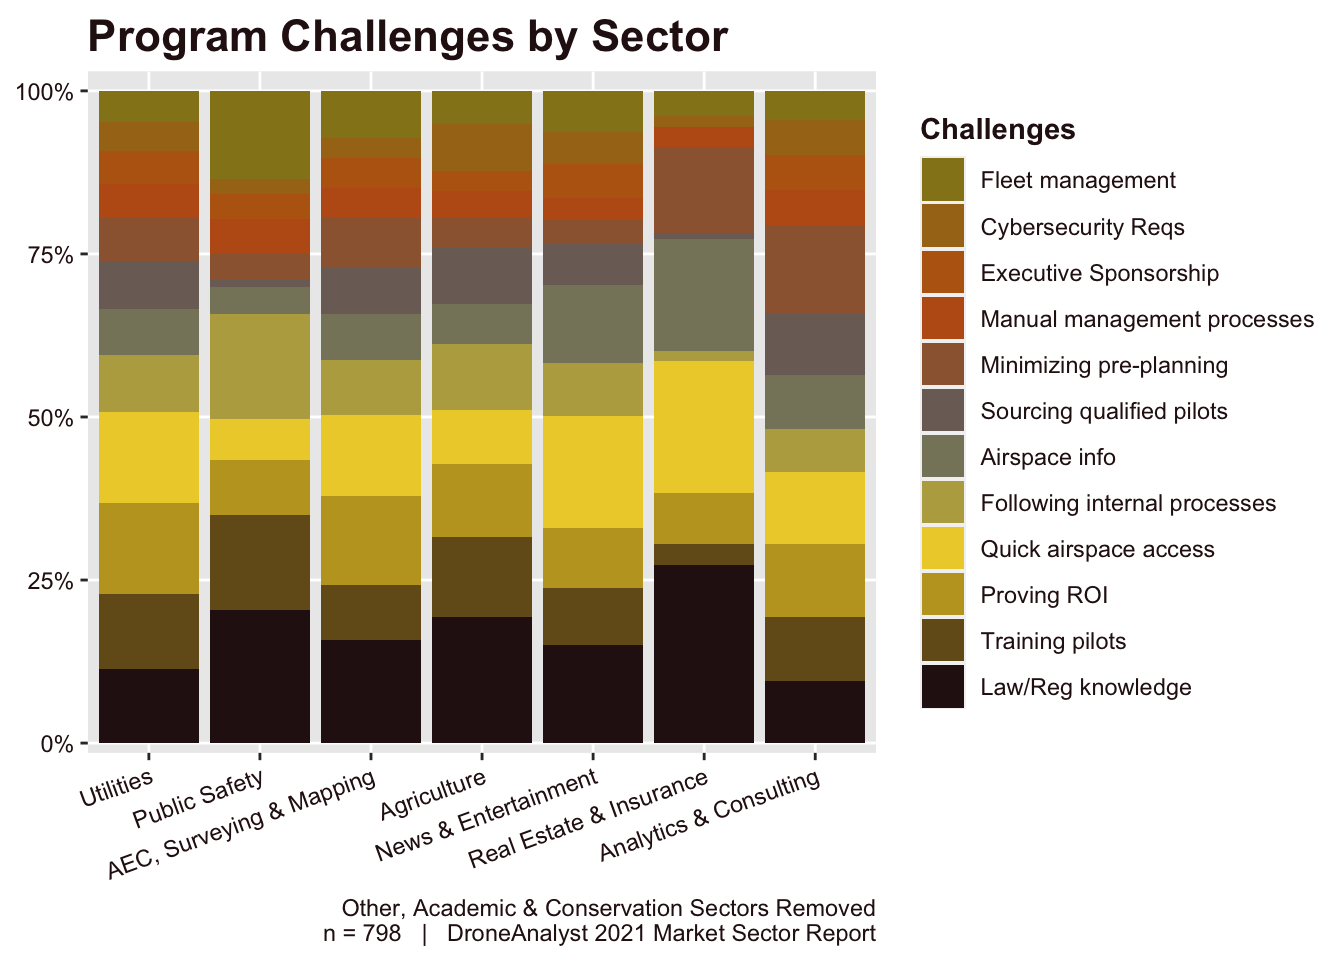 Program Challenges by Sector